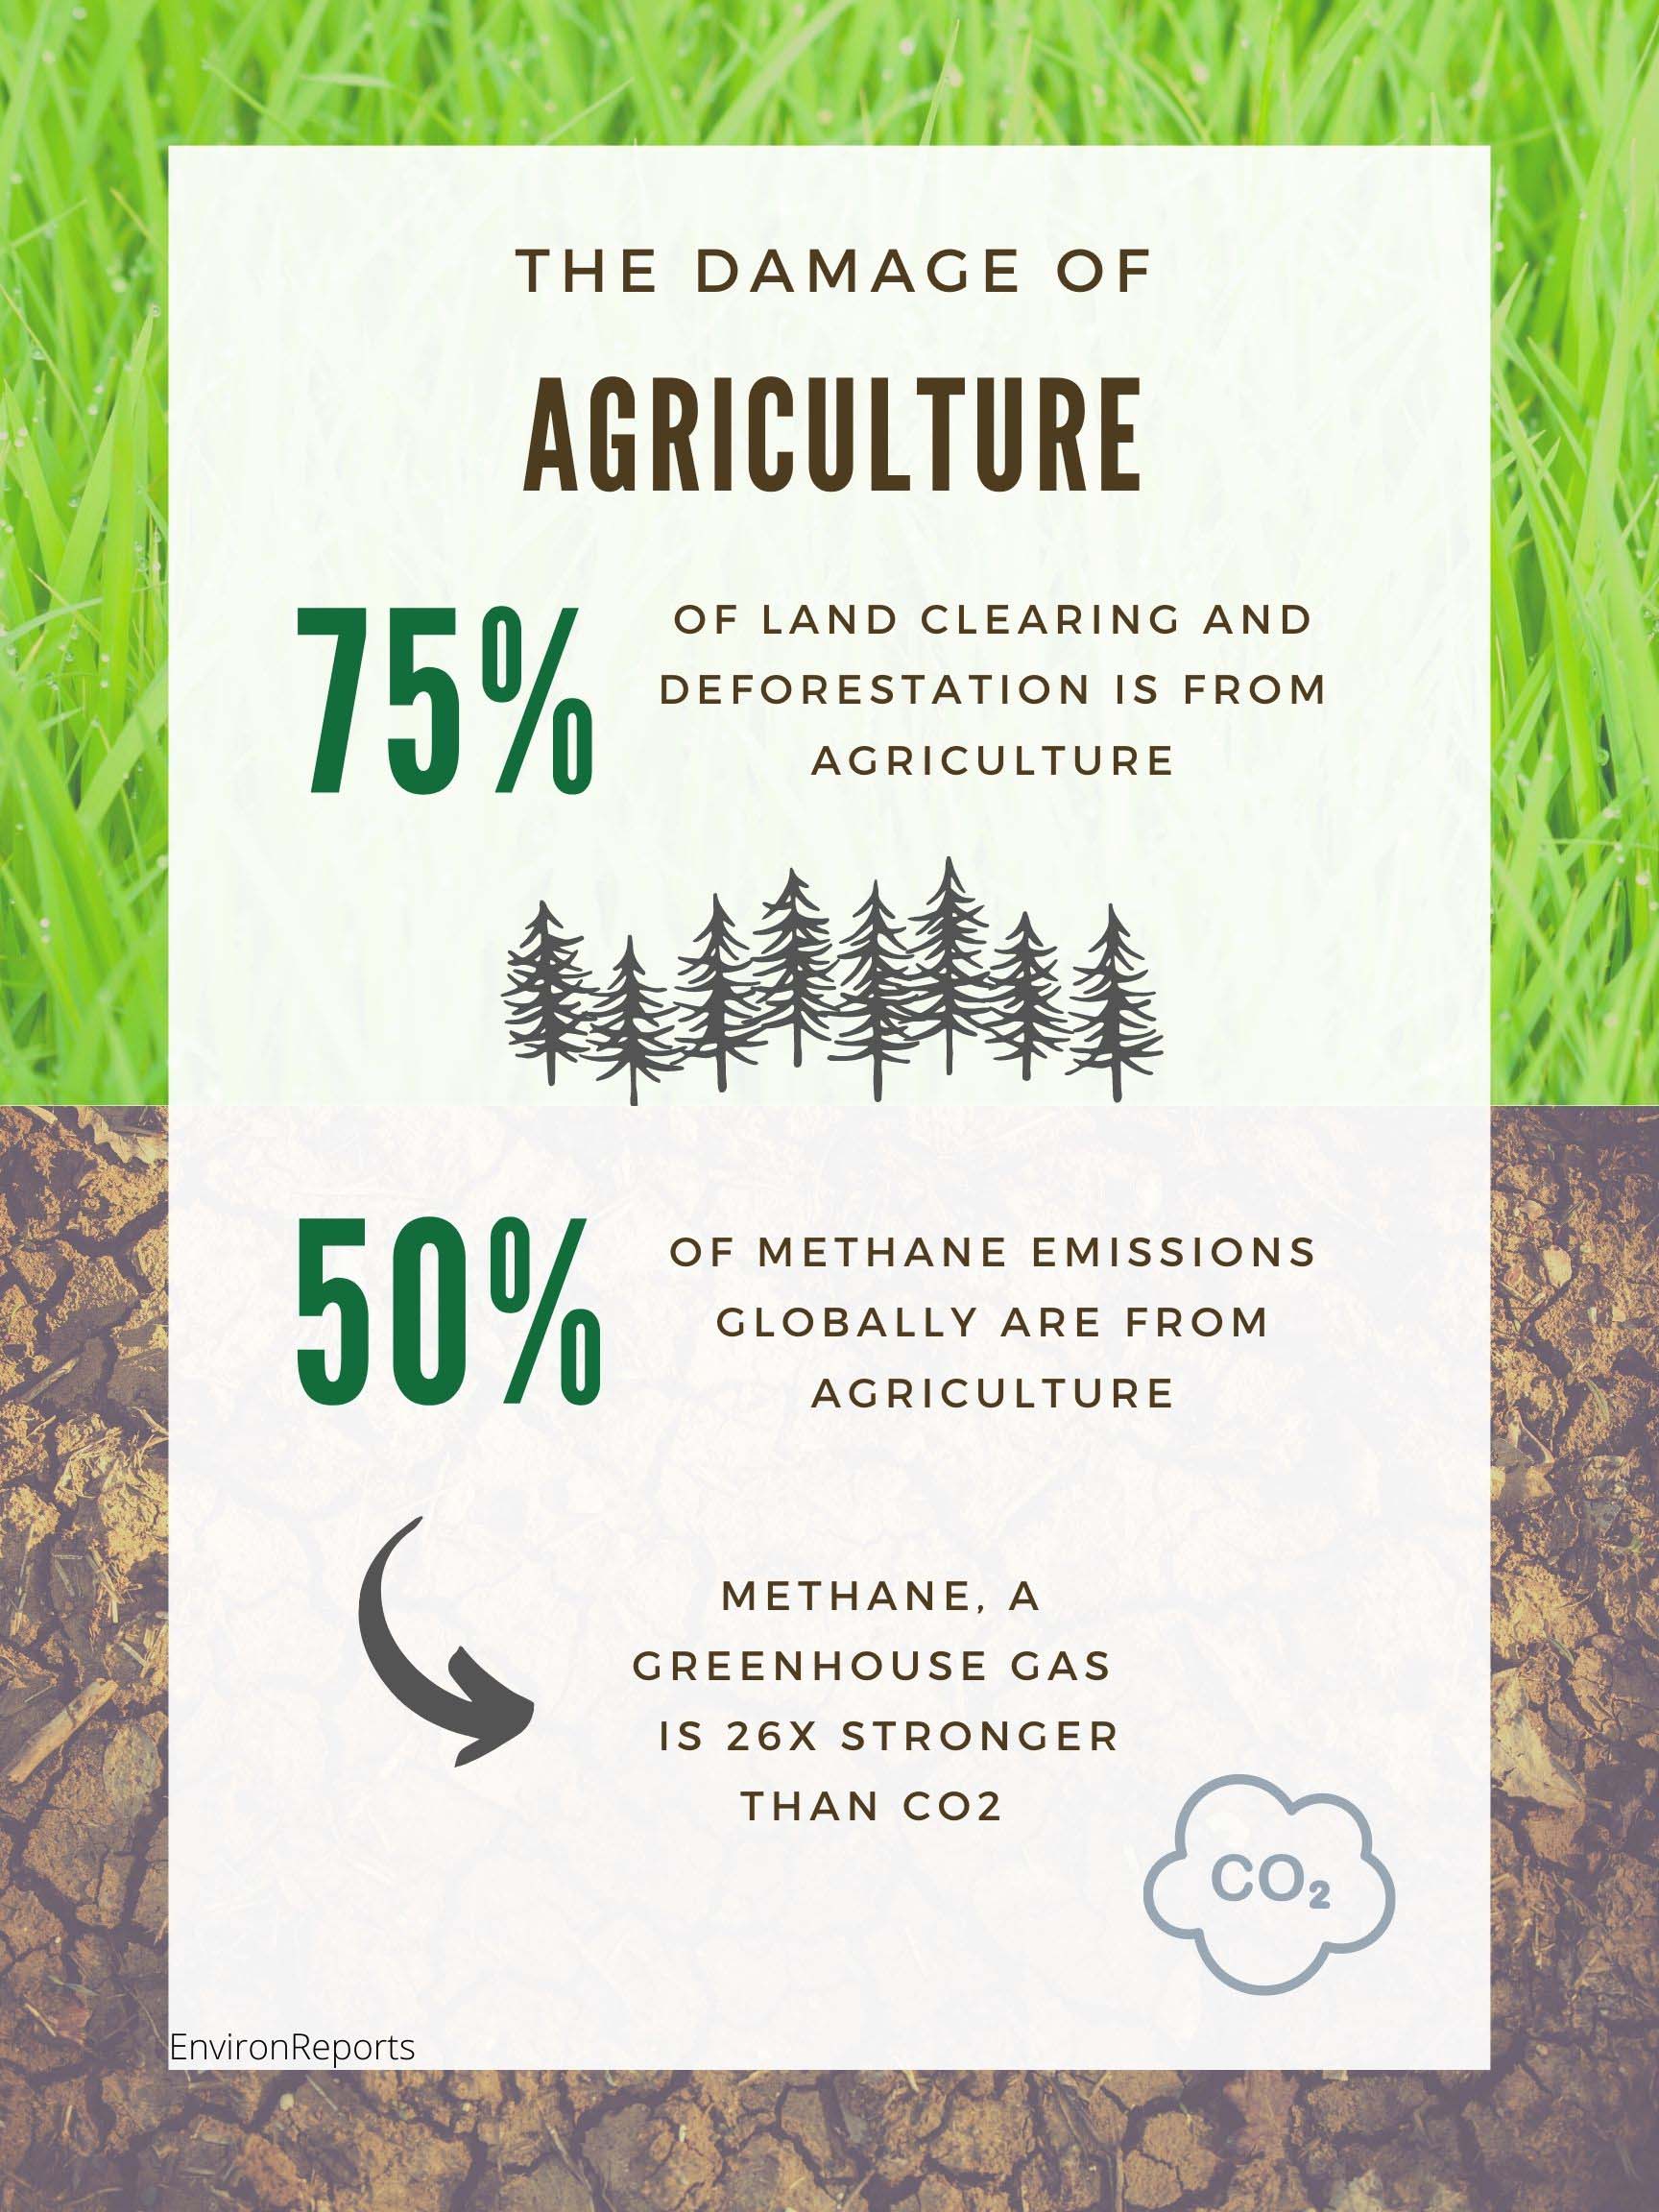 75% of land clearing and deforestation is from agriculture. 50% of methane emossions globally are from agriculture. Methane, a greenhouse gas, is 26x stronger than carbon dioxide.